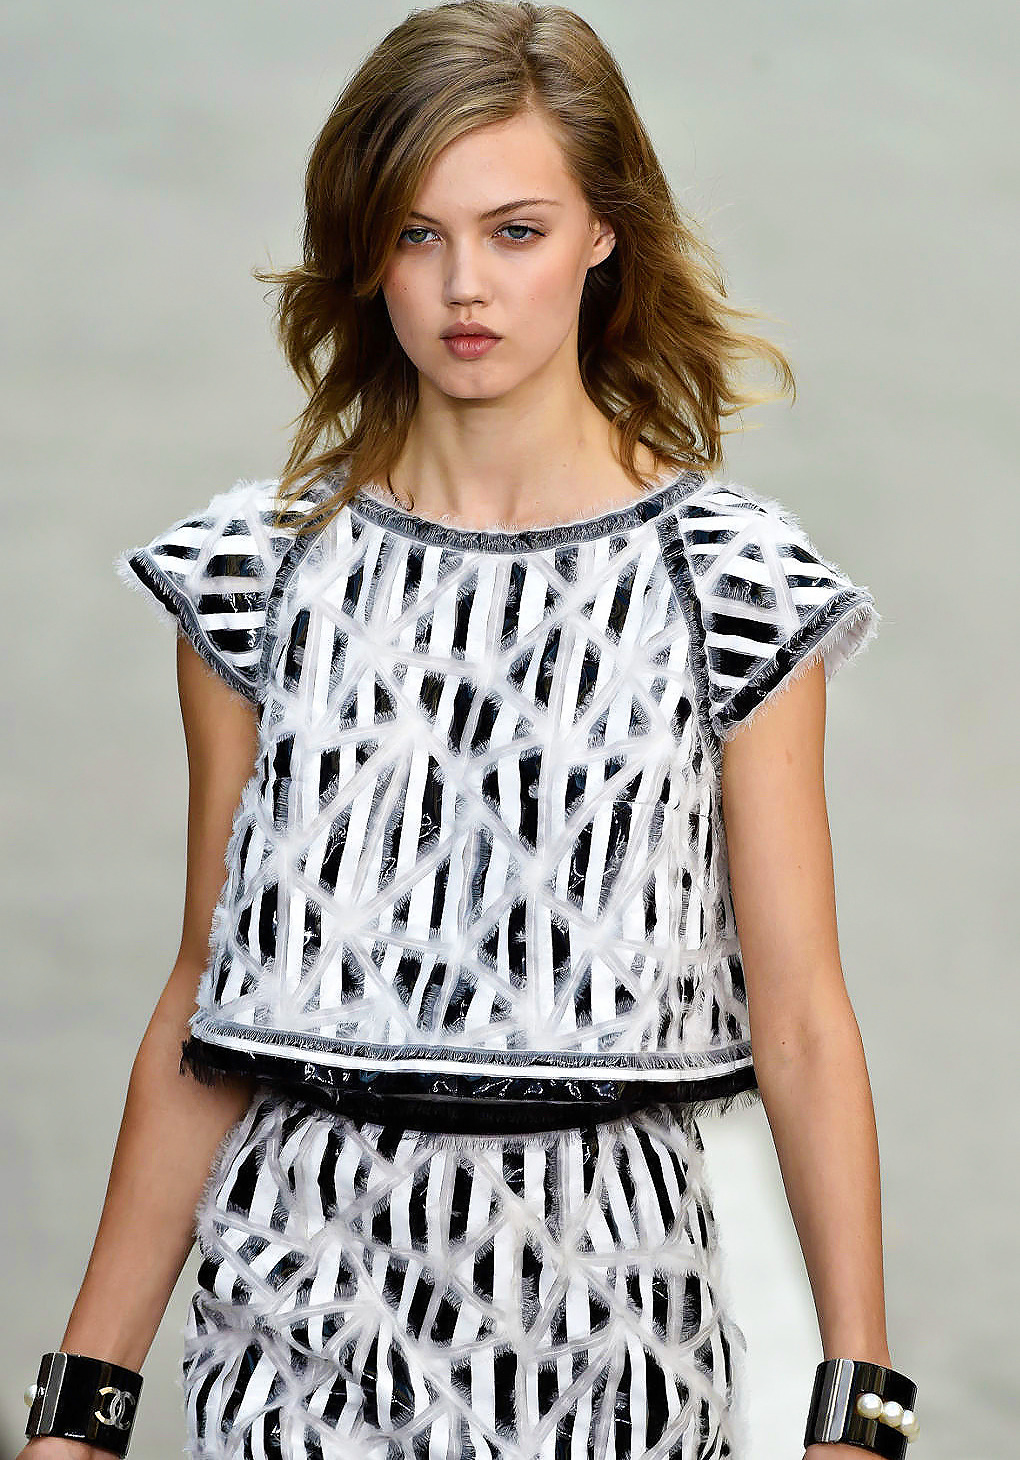 Lindsey Wixson closing Chanel SS 2015. - OHMYWIXSON